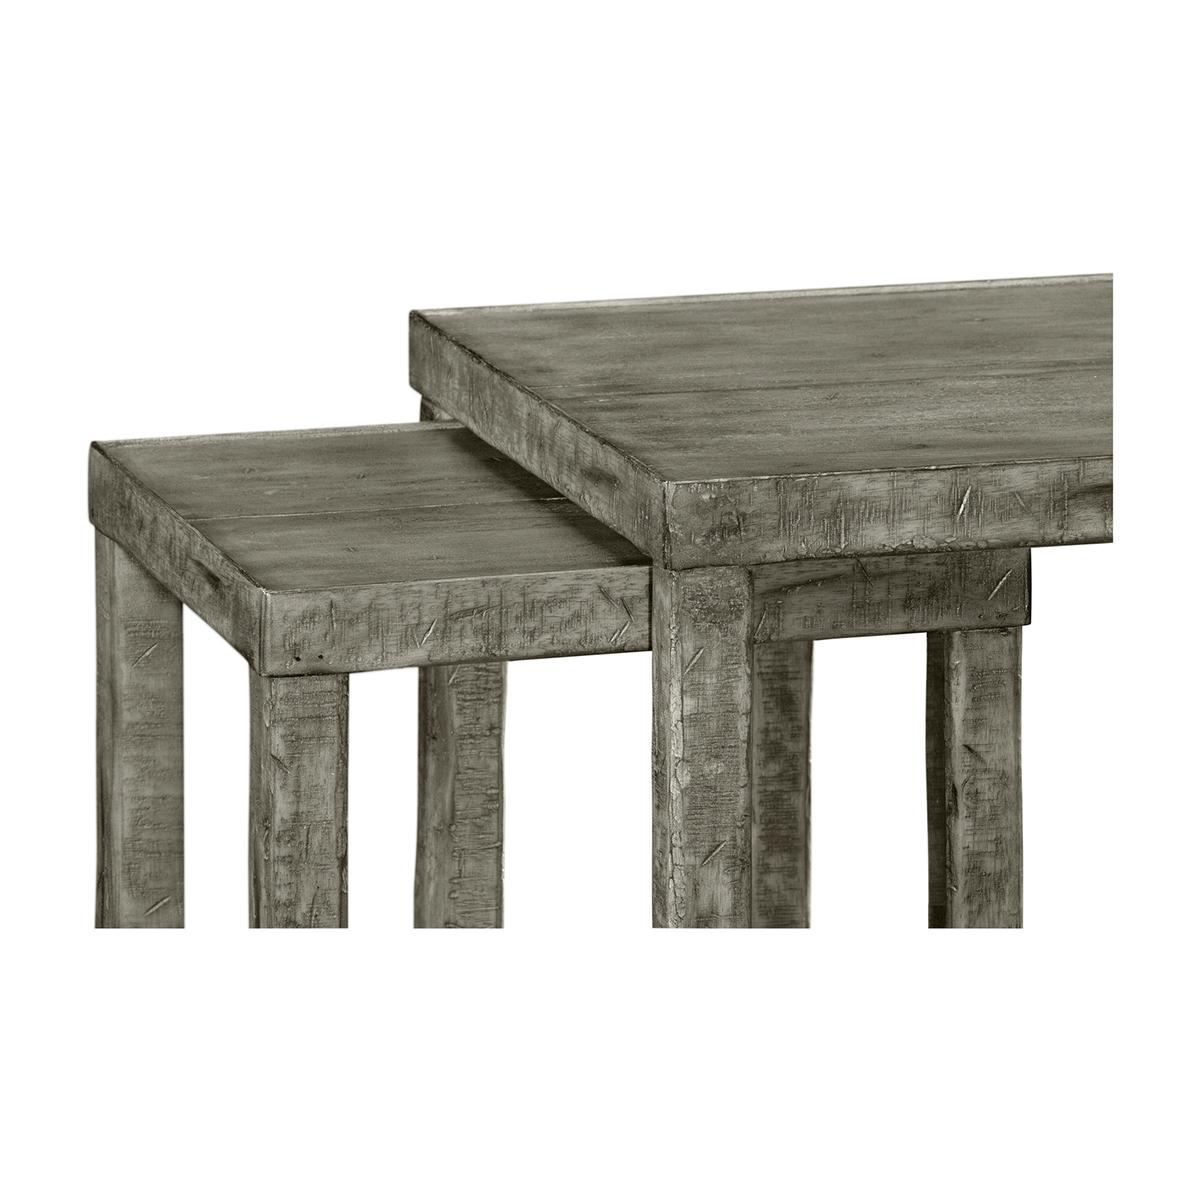 Rustic Country Nesting Tables, Dark Grey In New Condition For Sale In Westwood, NJ